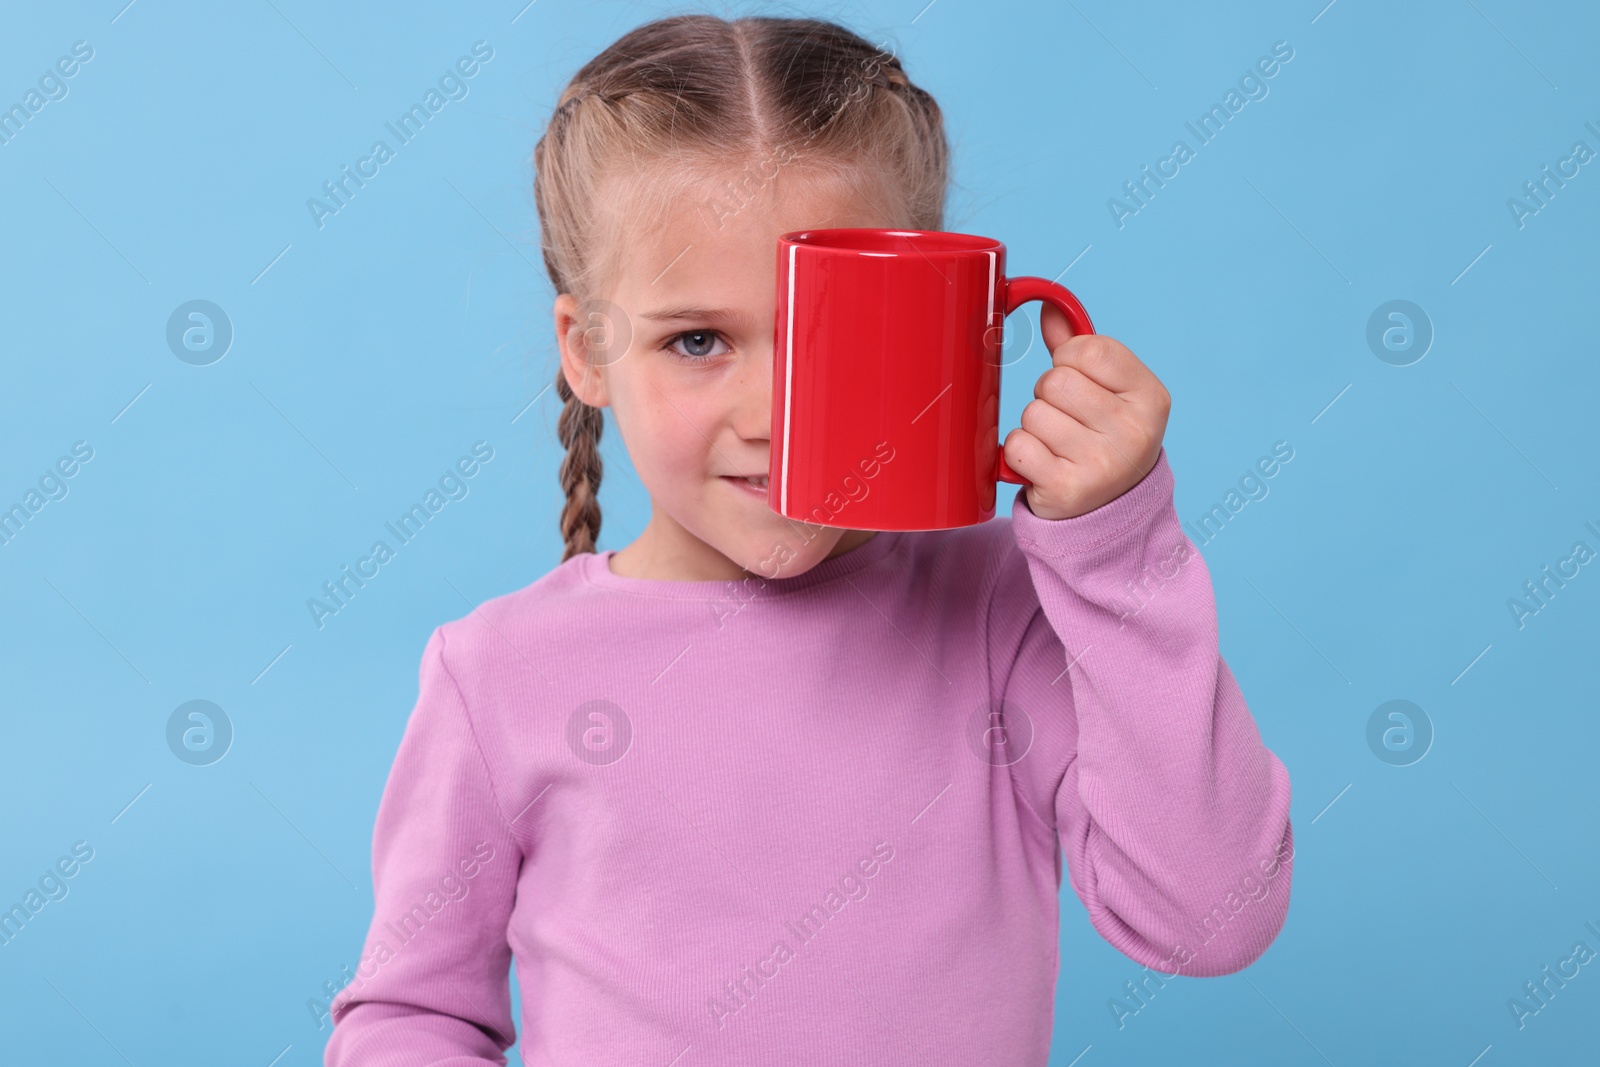 Photo of Cute girl covering eye with red ceramic mug on light blue background